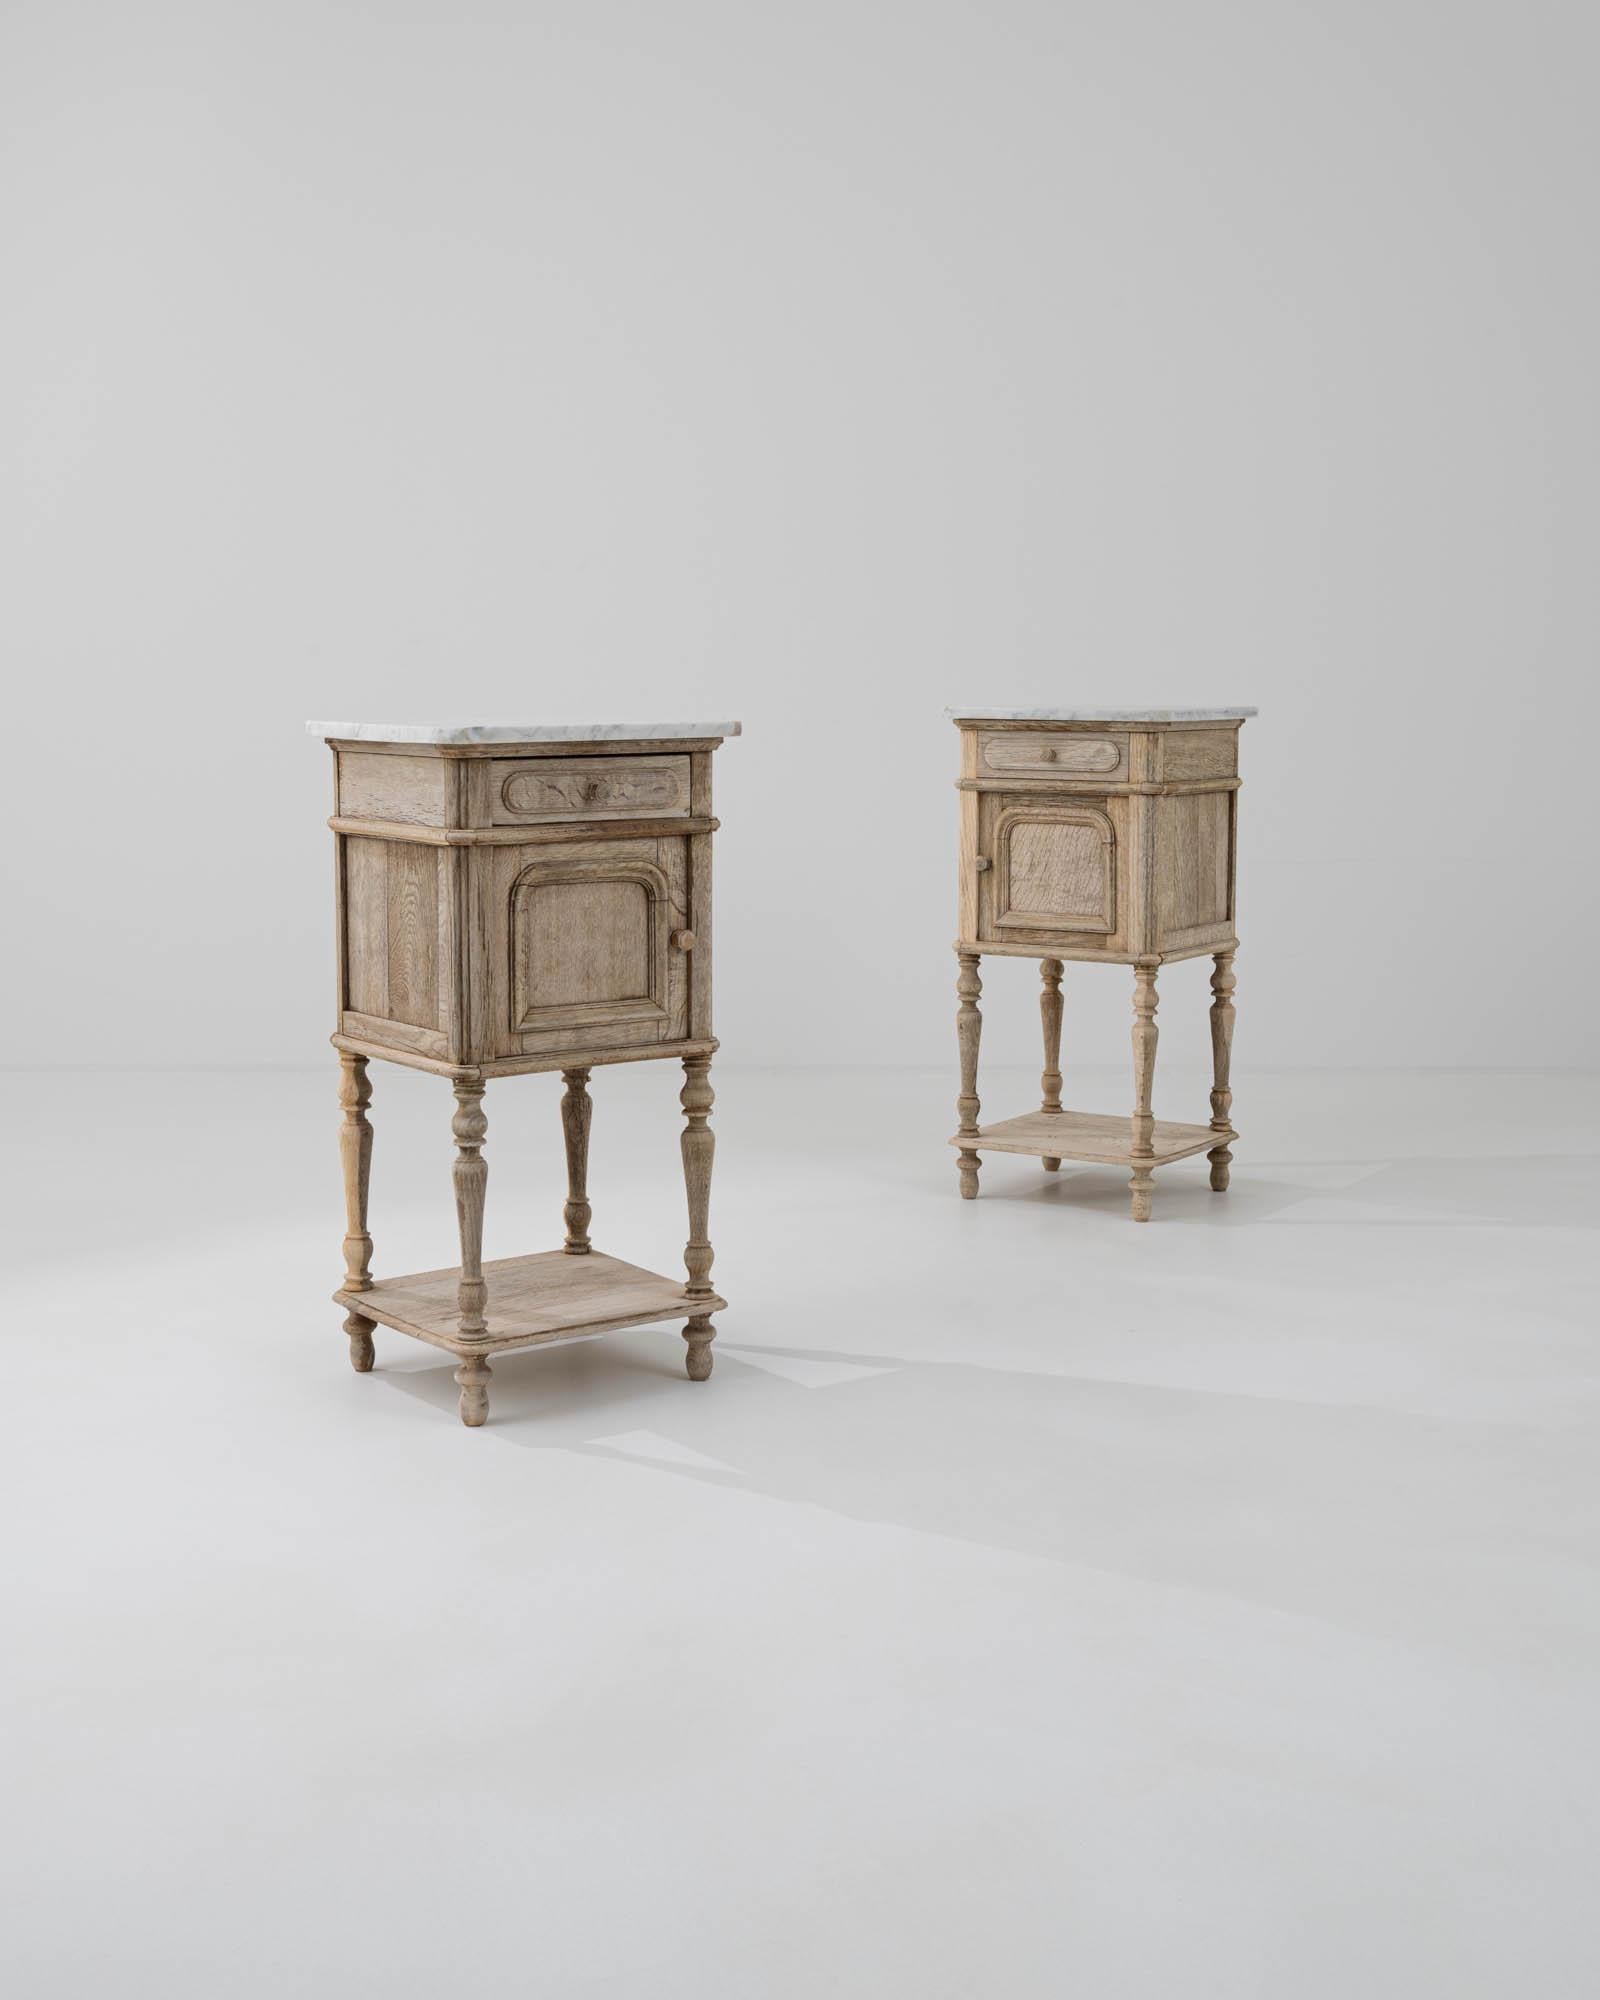 A pair of oak night stands created in France circa 1900. Traditionally crafted, this subtly styled bedside table is adorned with a marble top, projecting a sense of calm and refined elegance. Cloudy gray veins drift through the ivory colored marble